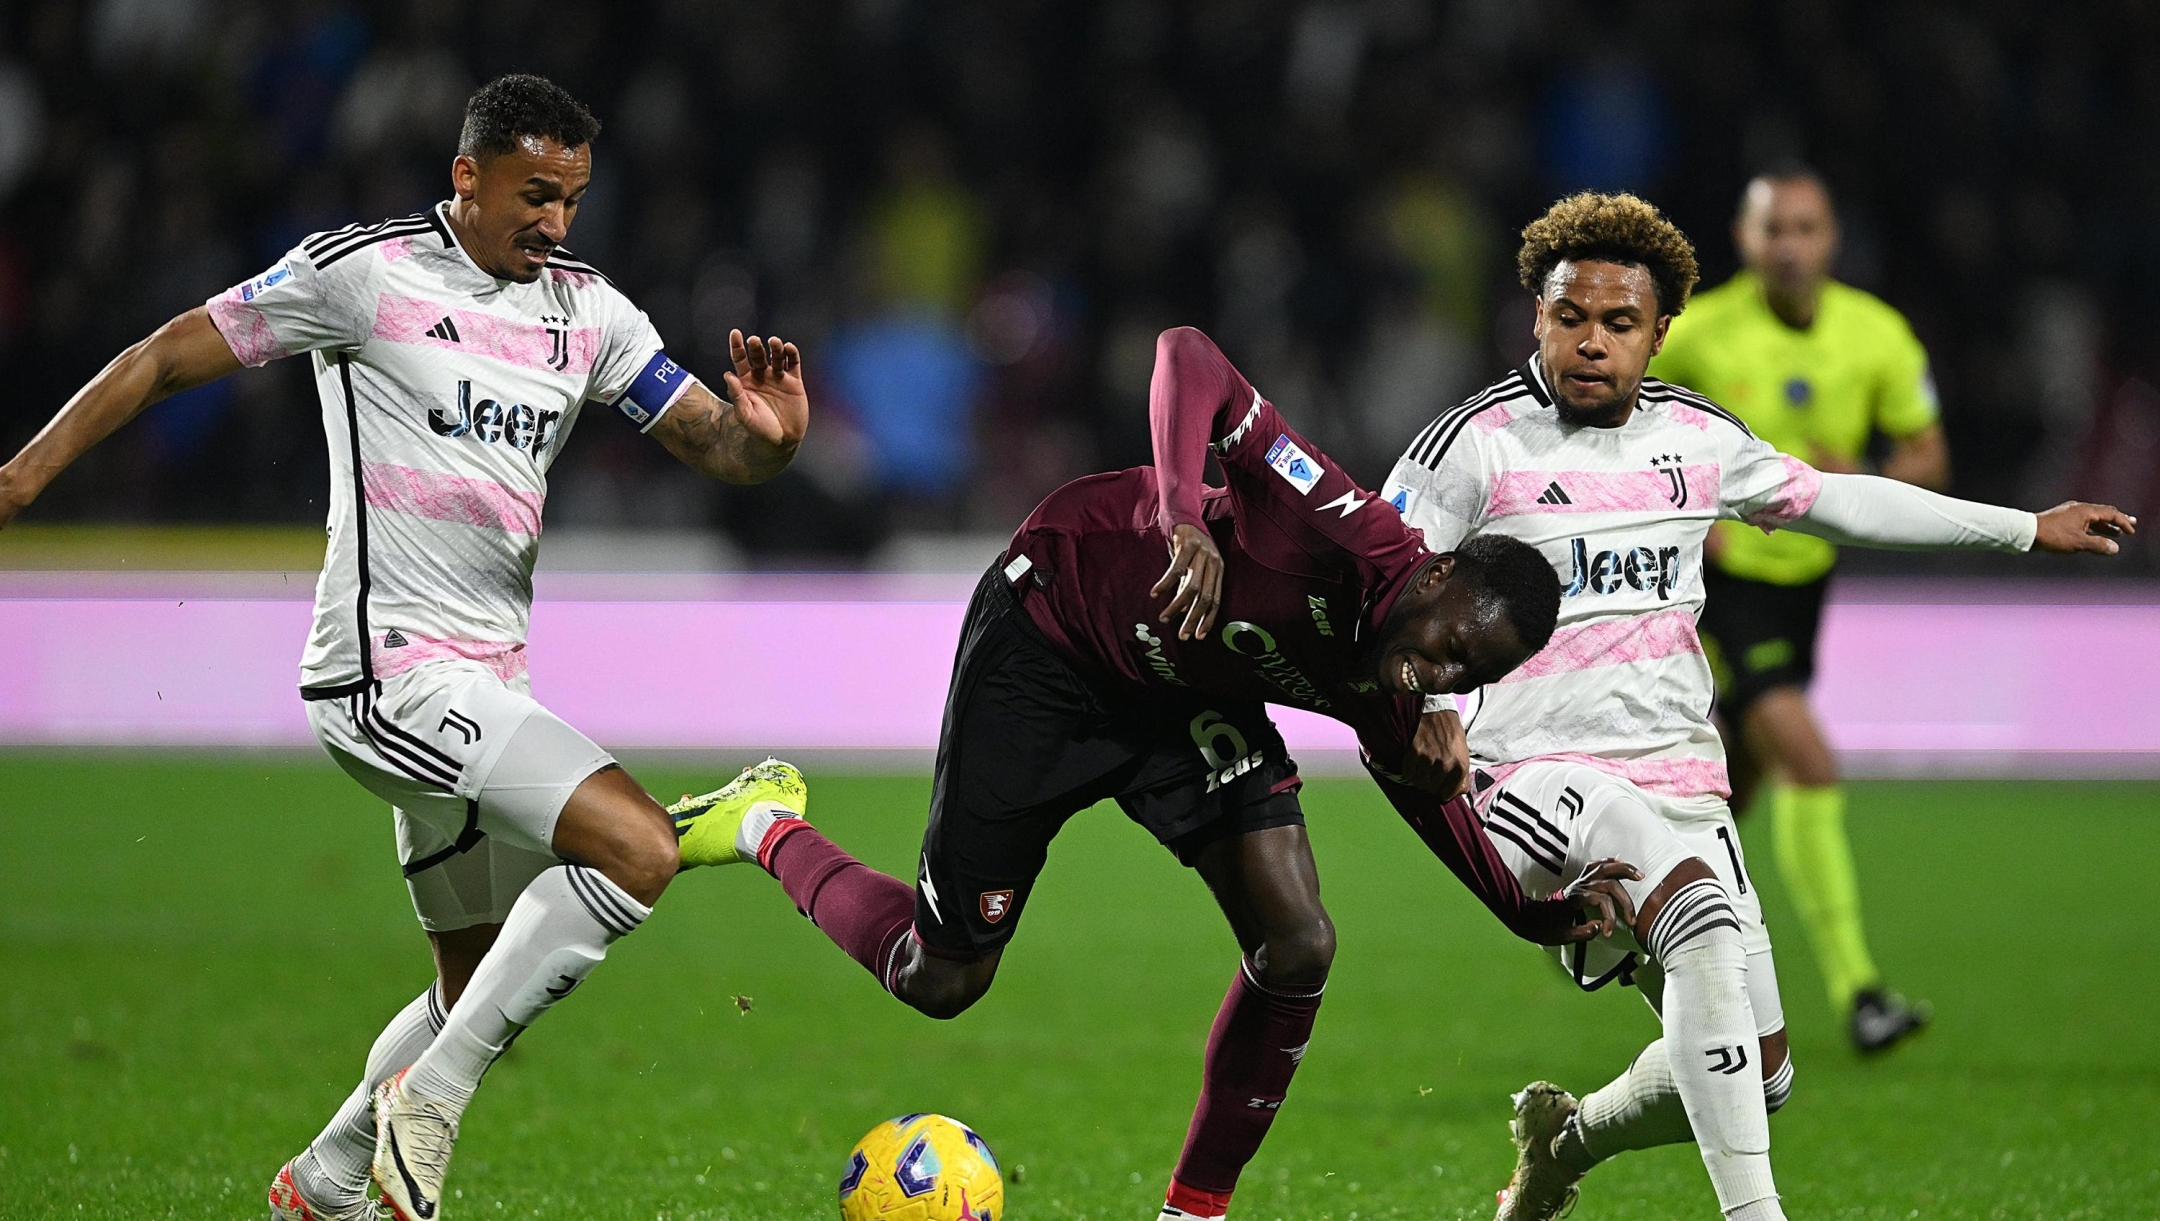 SALERNO, ITALY - JANUARY 07: Junior Sambia of US Salernitana battles for possession with Danilo and Weston McKennie of Juventus during the Serie A TIM match between US Salernitana and Juventus at Stadio Arechi on January 07, 2024 in Salerno, Italy. (Photo by Francesco Pecoraro/Getty Images)